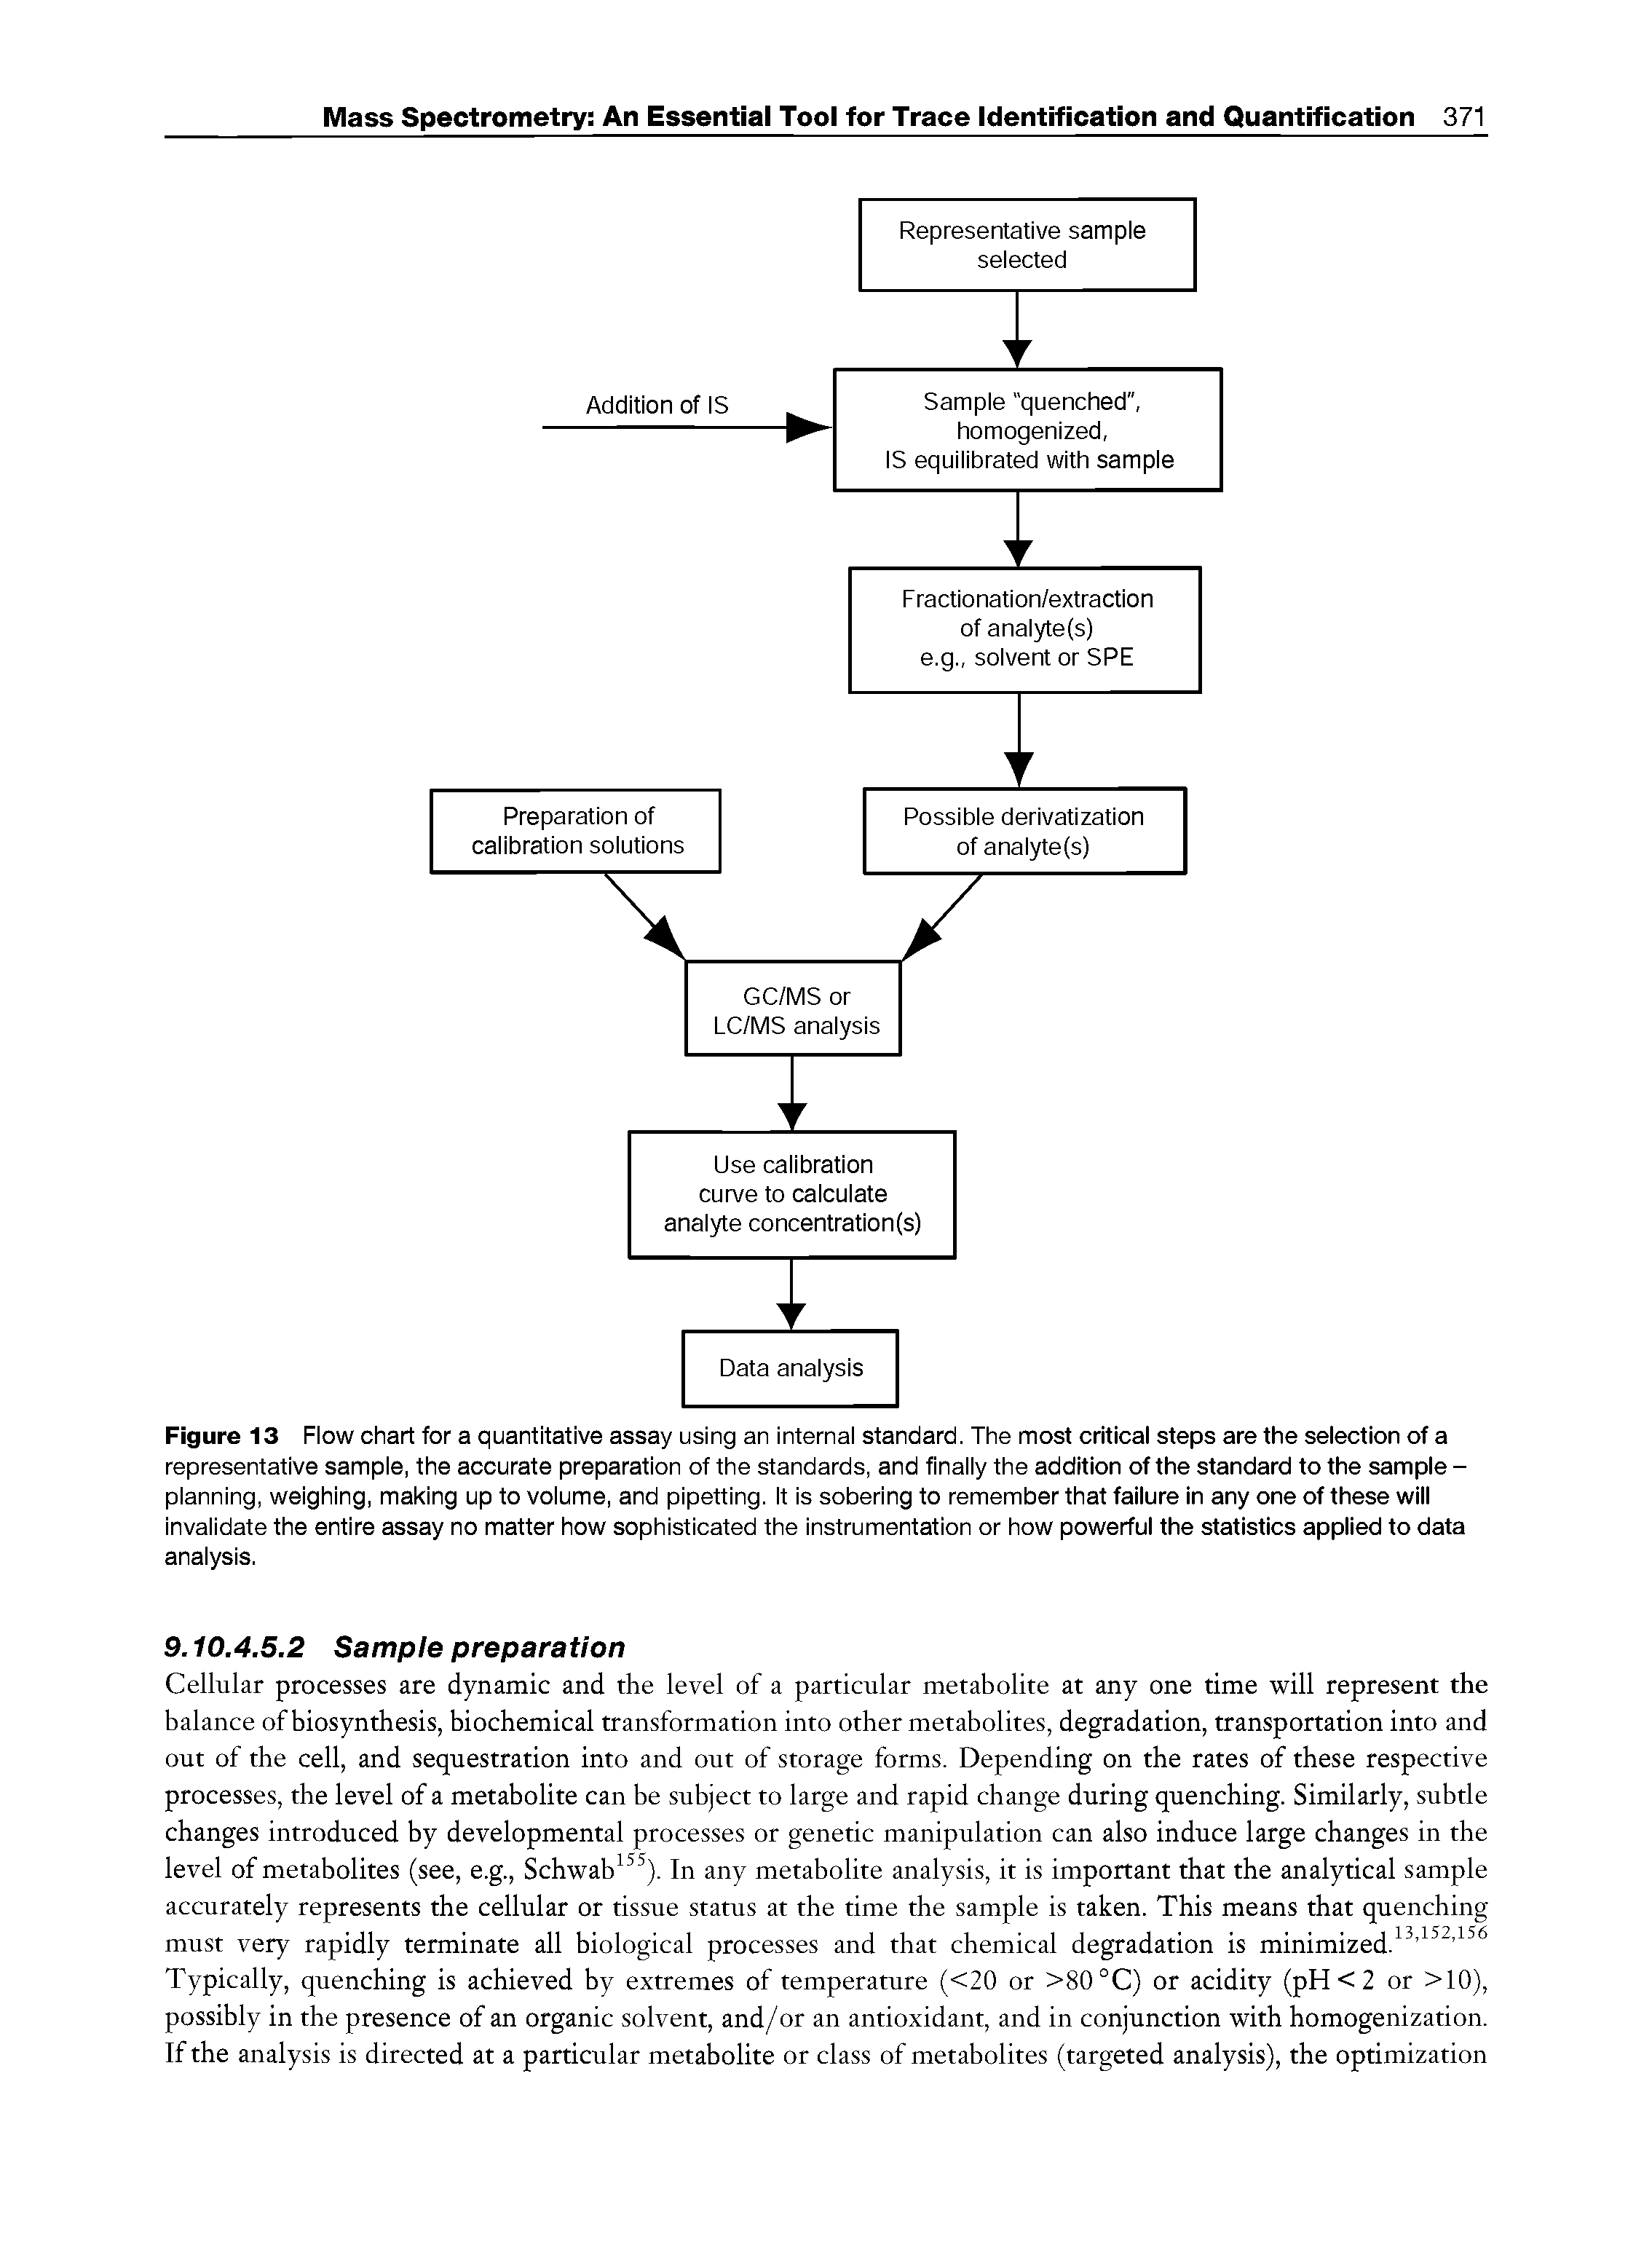 Figure 13 Flow chart for a quantitative assay using an internal standard. The most critical steps are the selection of a representative sample, the accurate preparation of the standards, and finally the addition of the standard to the sample -planning, weighing, making up to volume, and pipetting. It is sobering to remember that failure in any one of these will invalidate the entire assay no matter how sophisticated the instrumentation or how powerful the statistics applied to data analysis.